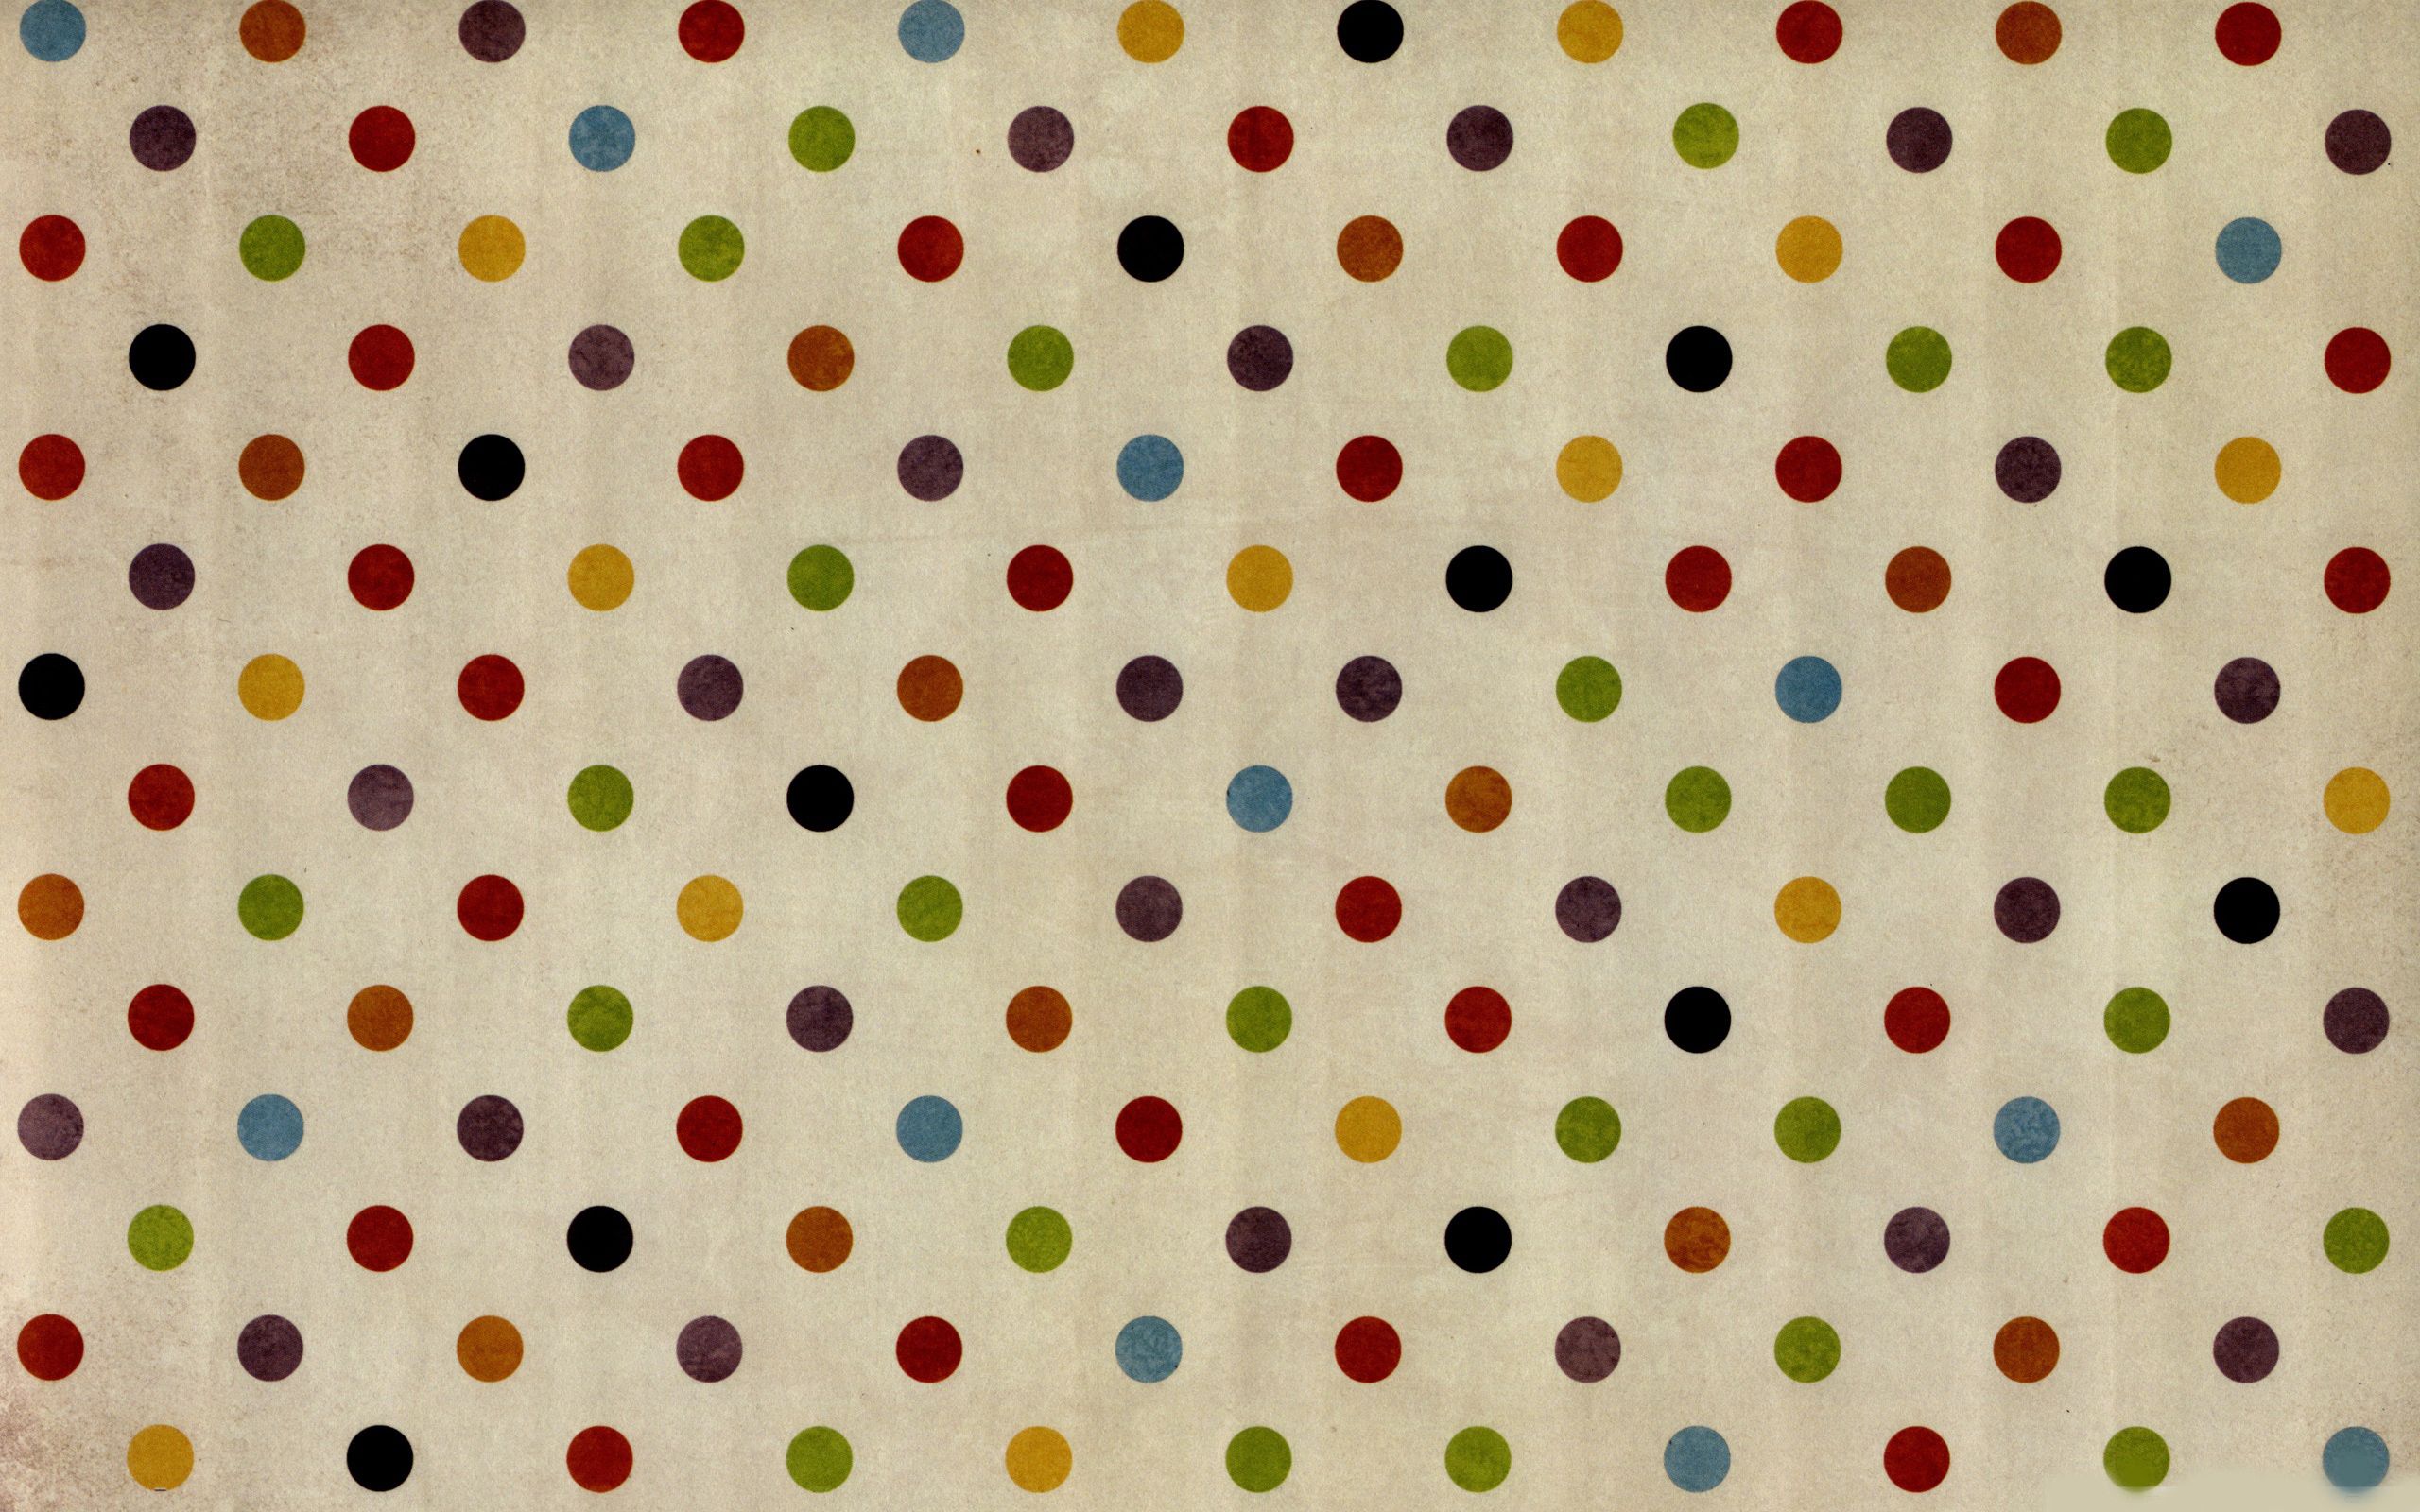 motley, texture, textures, circles, multicolored, surface High Definition image